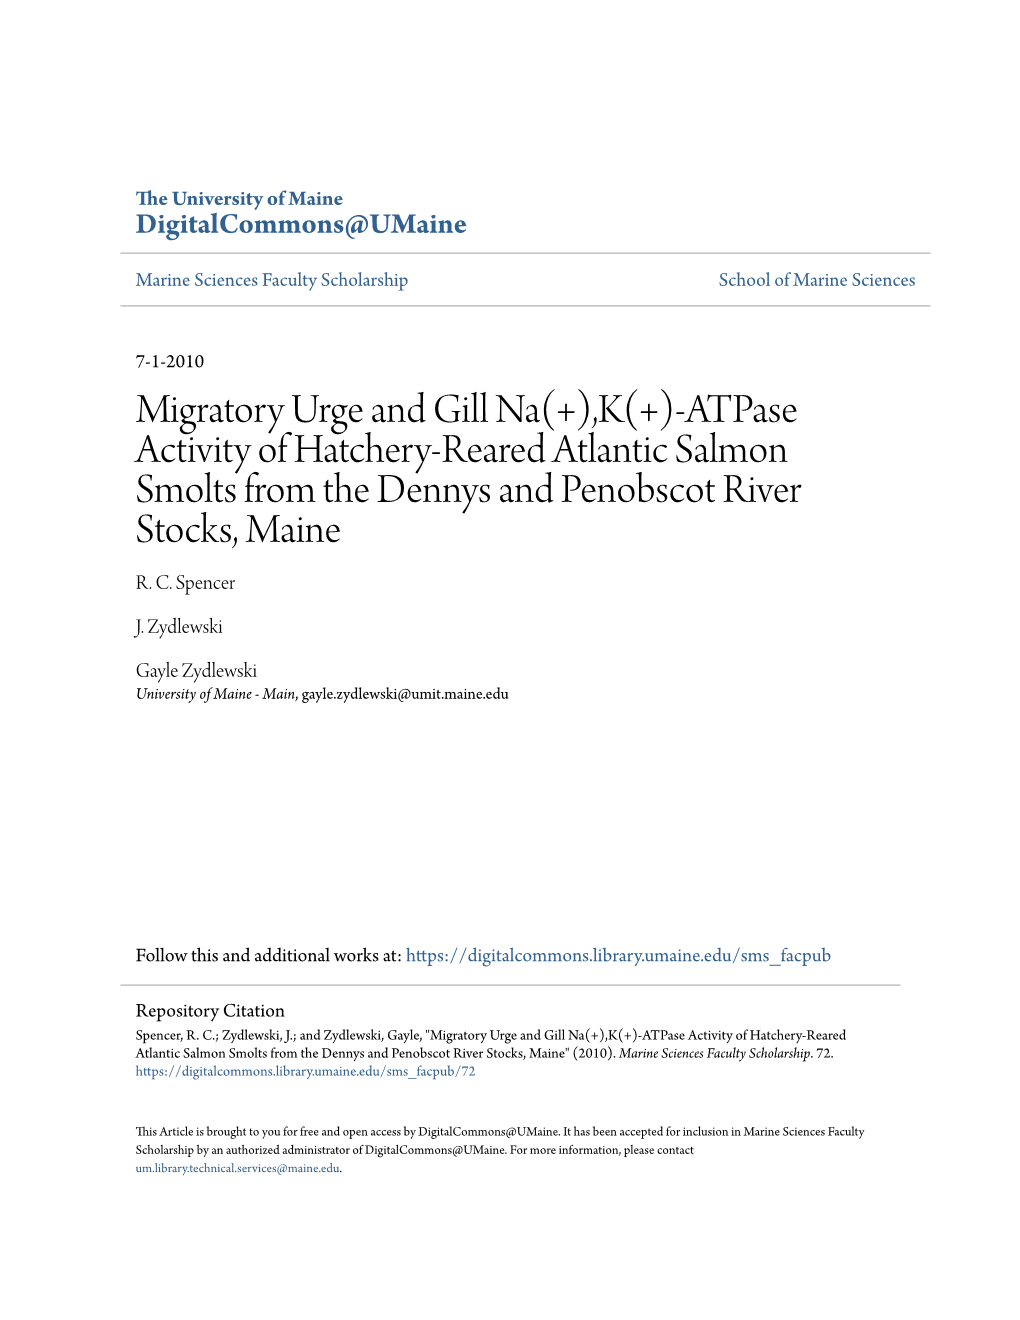 Atpase Activity of Hatchery-Reared Atlantic Salmon Smolts from the Dennys and Penobscot River Stocks, Maine R